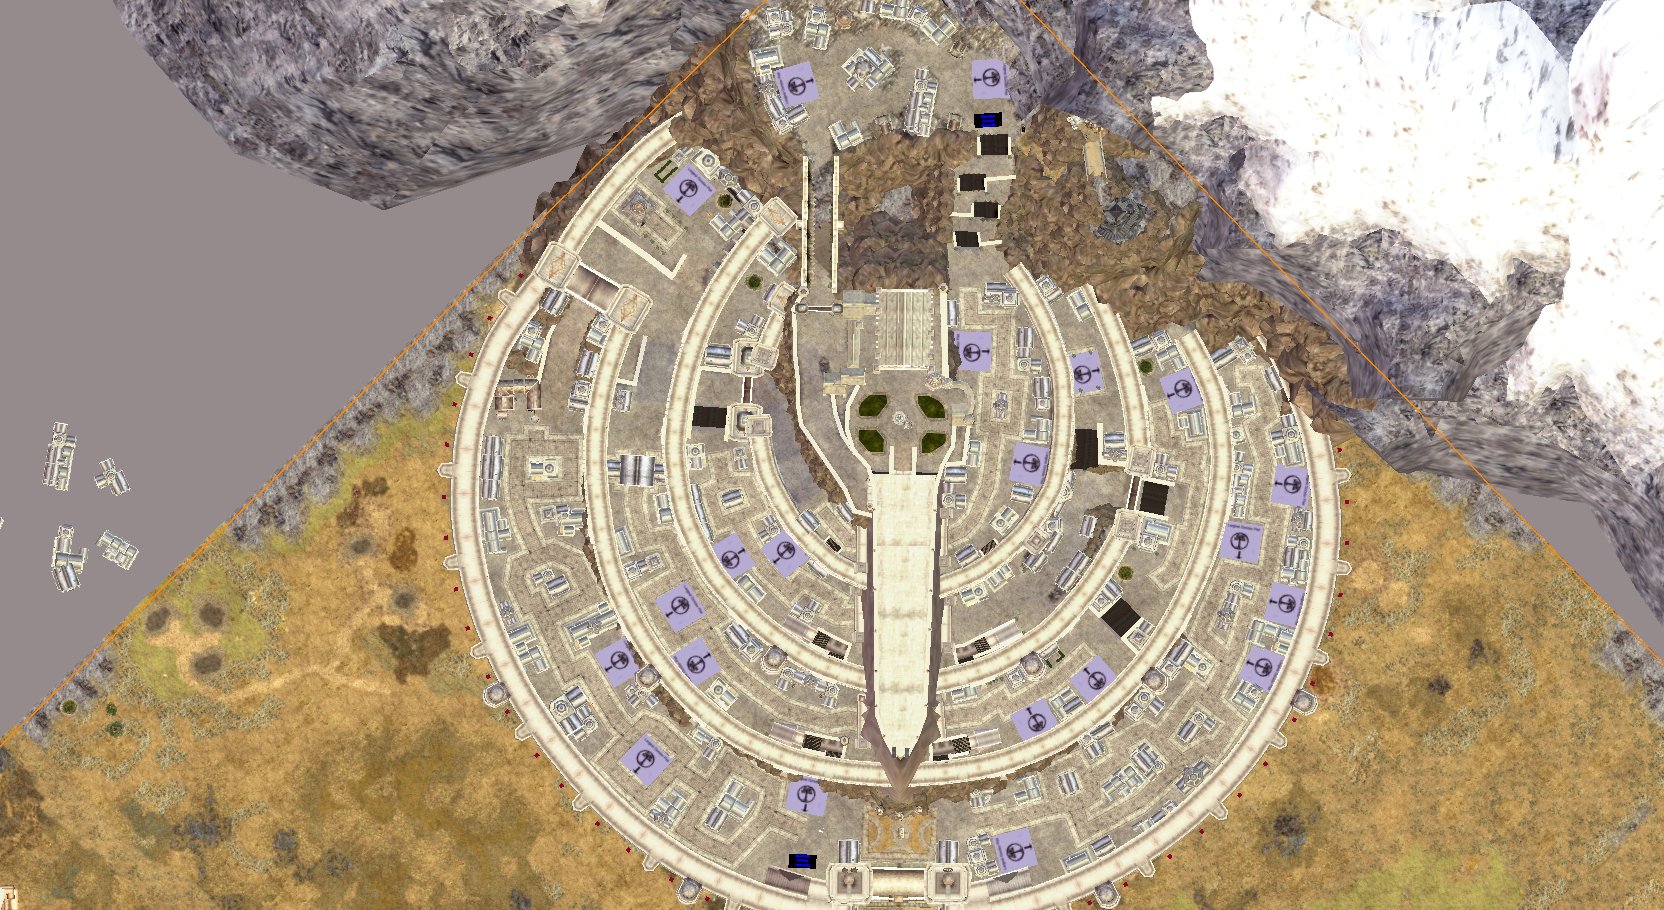 Minas Tirith - Lord of the Rings Map 